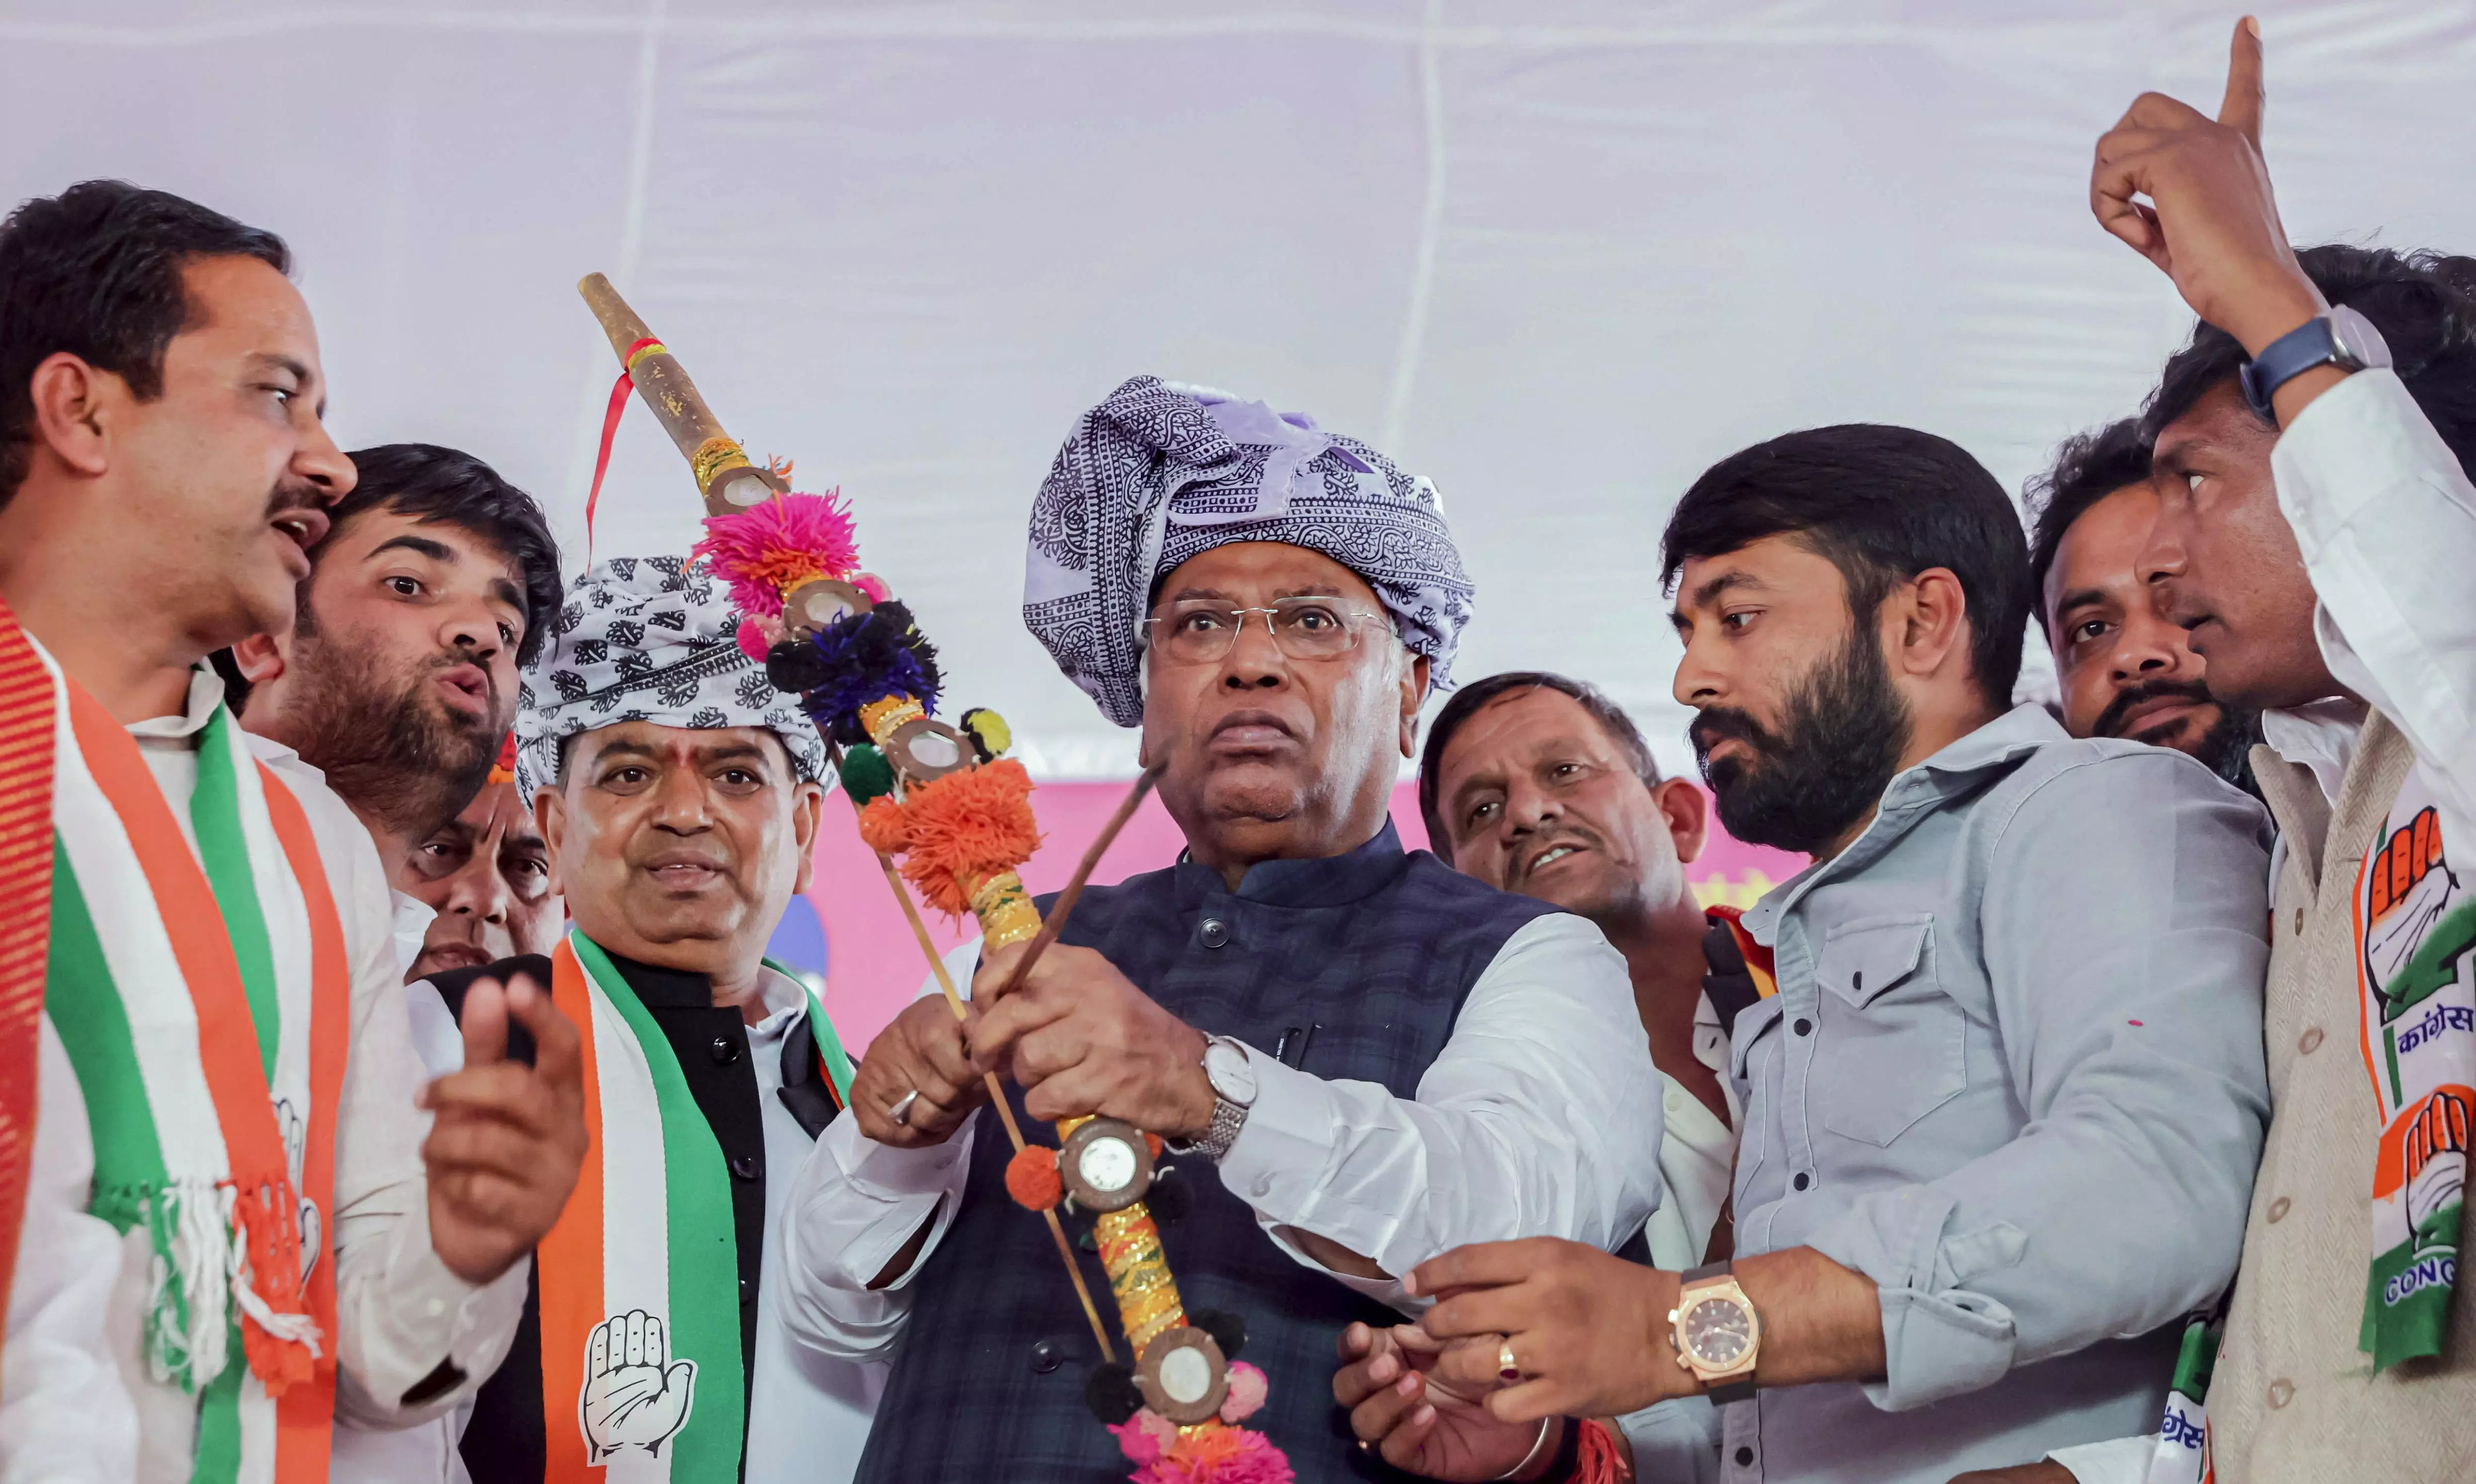 People of Rajasthan have decided to change tradition and choose Cong: Kharge